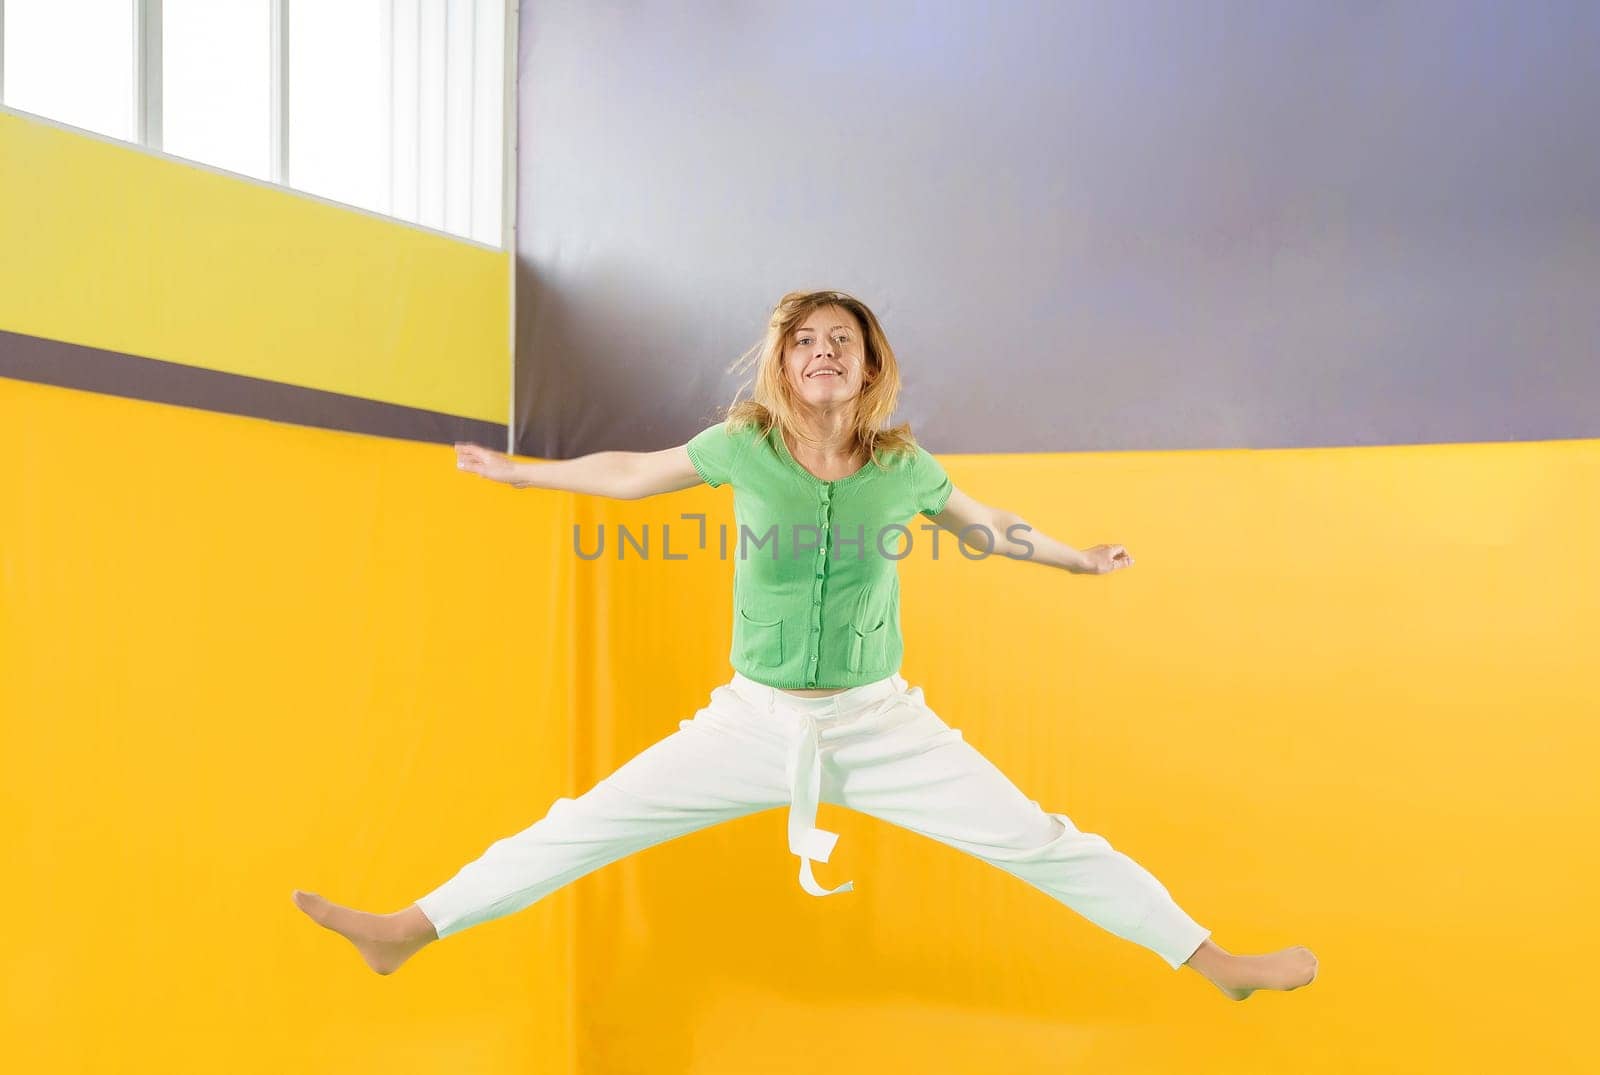 Young girl jumping on a trampoline in sport center by Mariakray